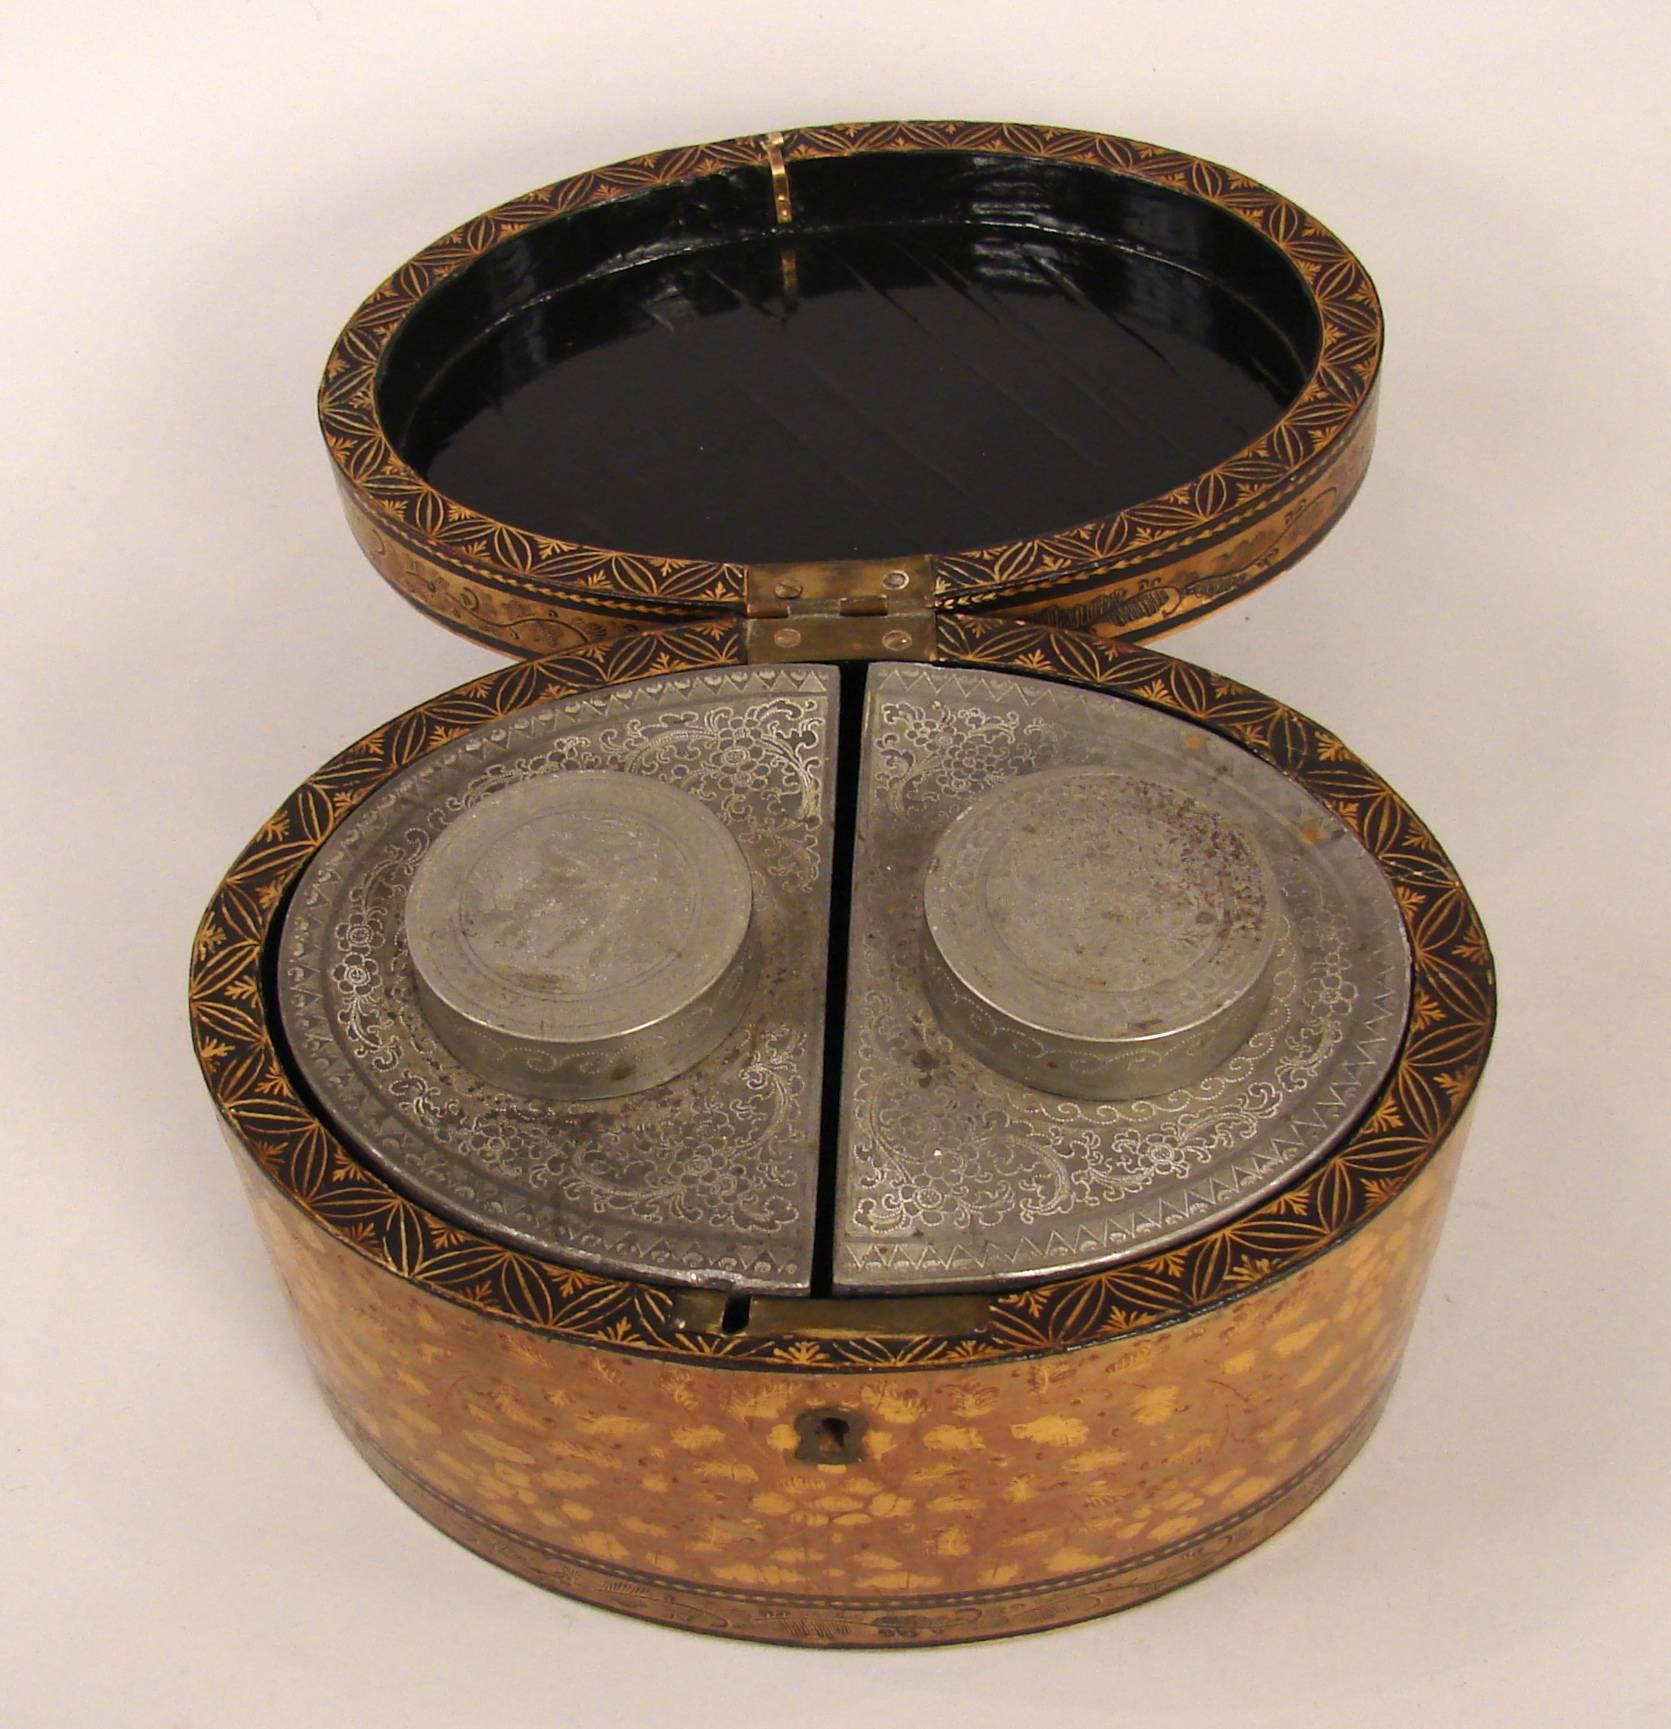 An attractive Chinese export gilt lacquer oval tea caddy decorated overall with black and gilt foliate designs, the interior with two engraved pewter canisters,
the top with stylized initials, circa 1825. Restored.